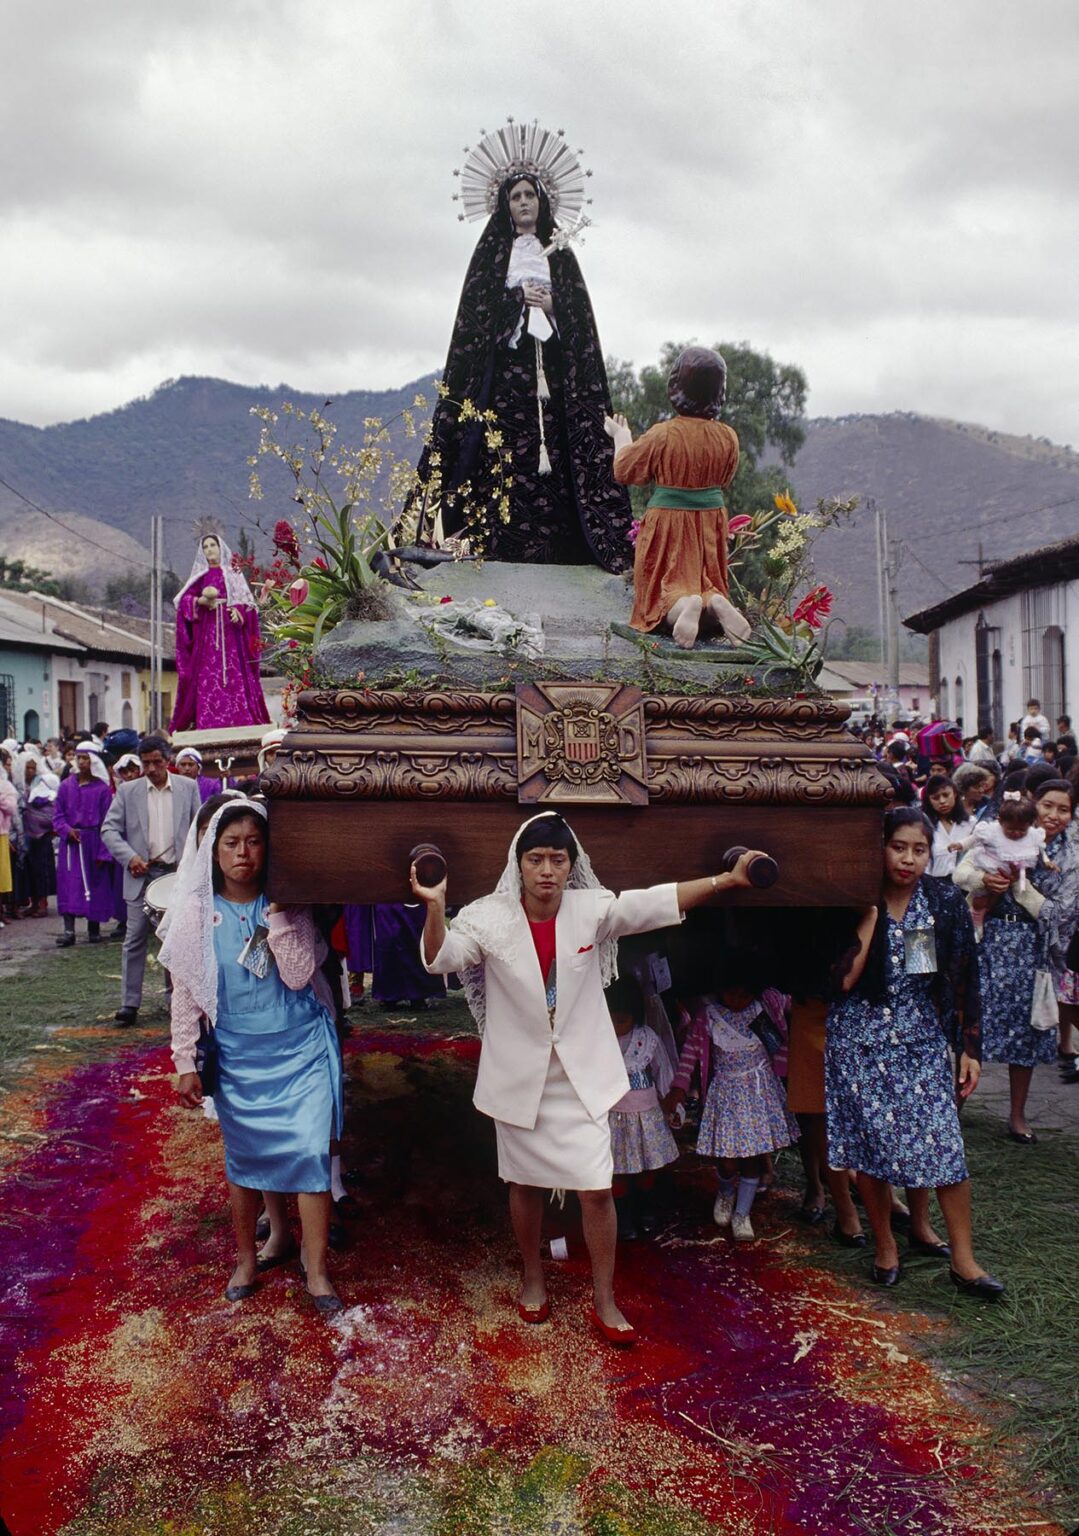 Women carry ANDA of the VIRGIN MARY (17th Century wooden statue) during GOOD FRIDAY PARADE - ANTIGUA, GUATEMALA